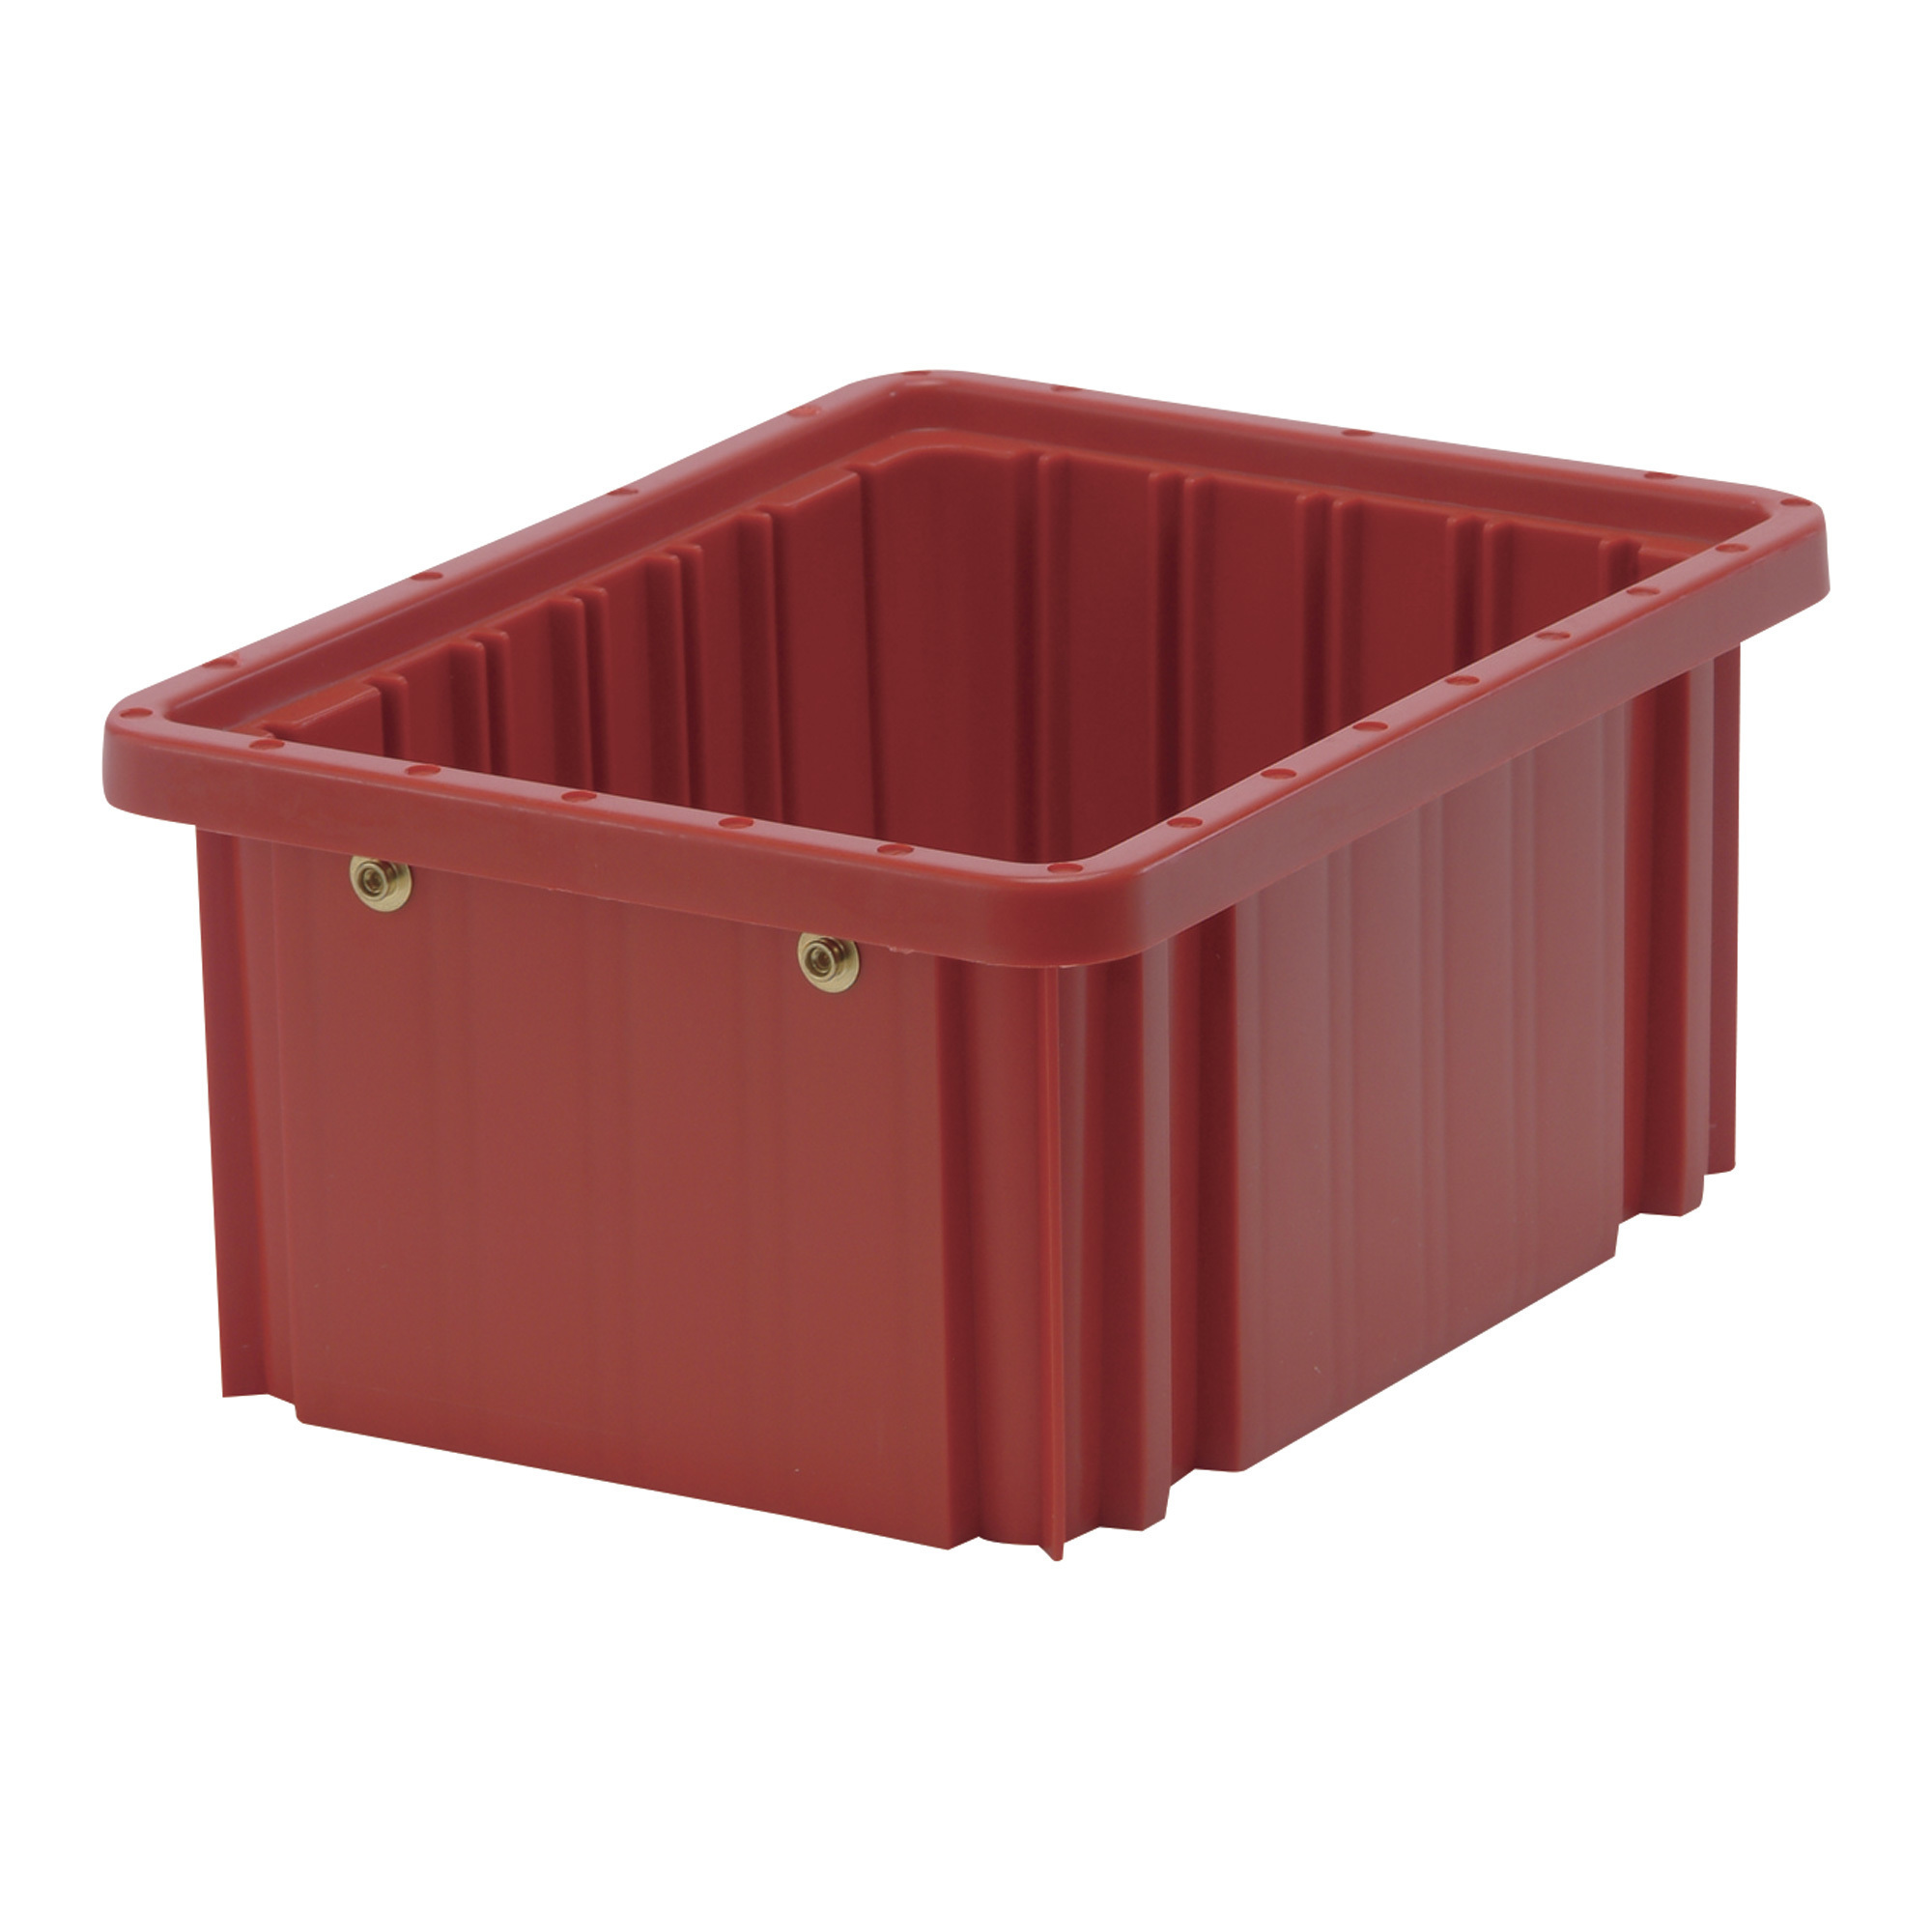 Quantum Storage Dividable Grid Container, 20-Pack, 10 7/8Inch L x 8 1/4Inch W x 5Inch H, Red, Model DG91050RD